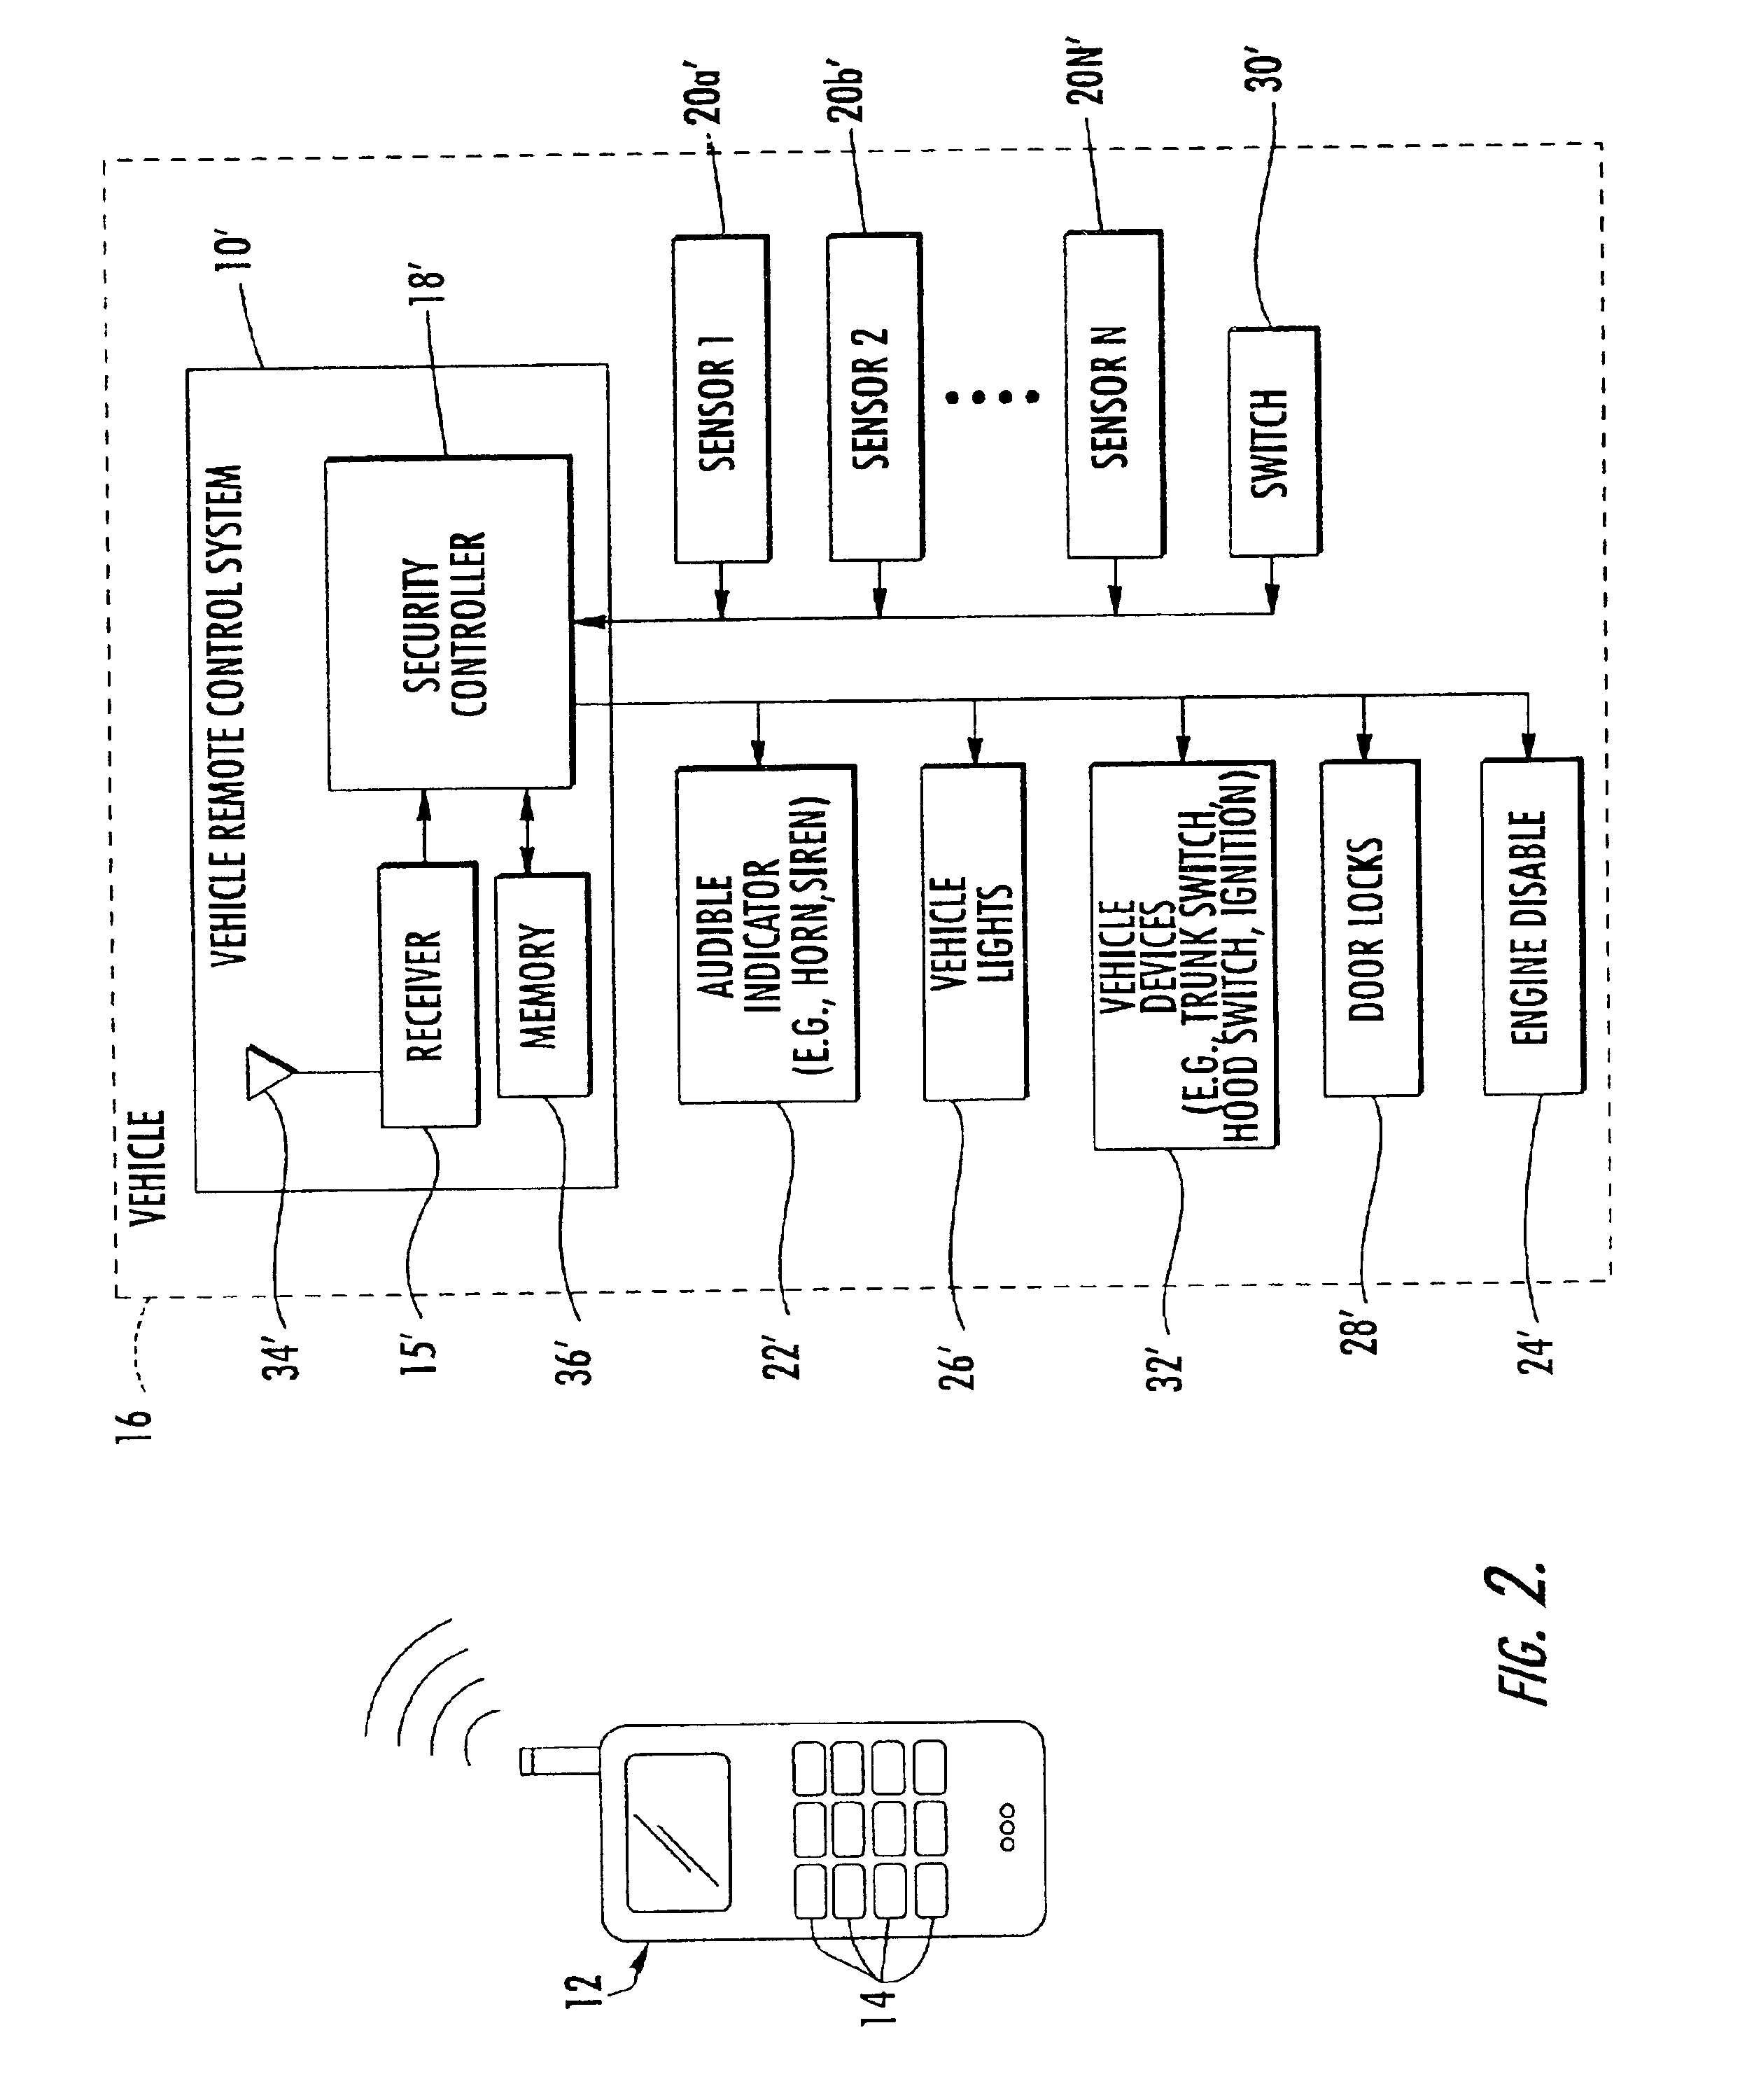 Remote control system using a cellular telephone and associated methods